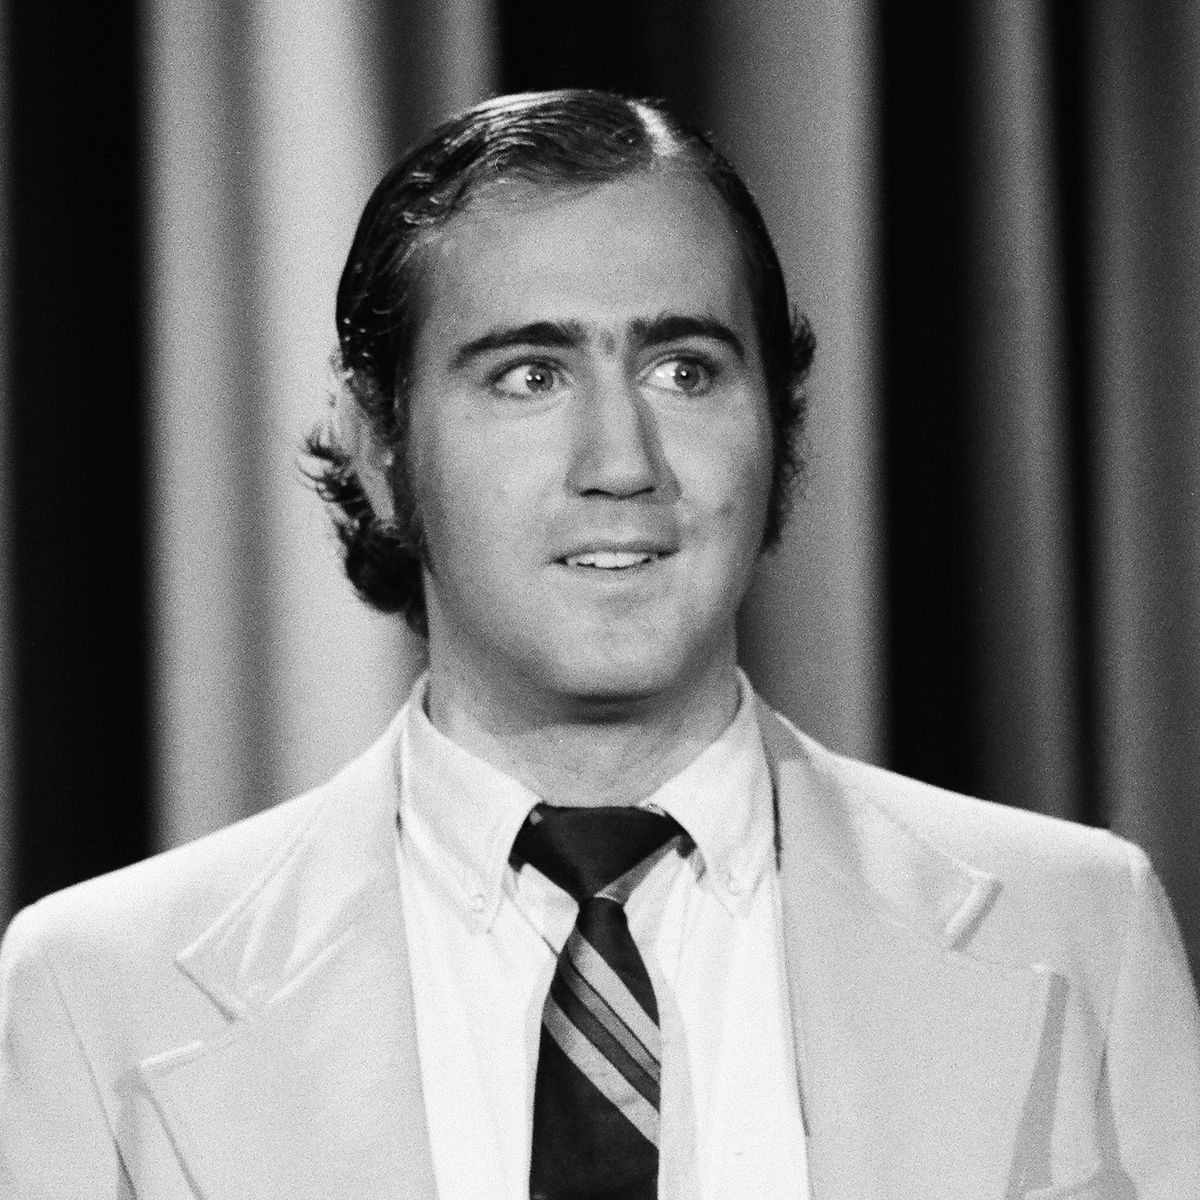 The Tonight Show Starring Johnny Carson - Season 15 THE TONIGHT SHOW STARRING JOHNNY CARSON -- Pictured: (l-t) Comedian Andy Kaufman performs on January 21, 1977 -- (Photo by: Fred Sabine/NBCU Photo Bank/NBCUniversal via Getty Images via Getty Images)